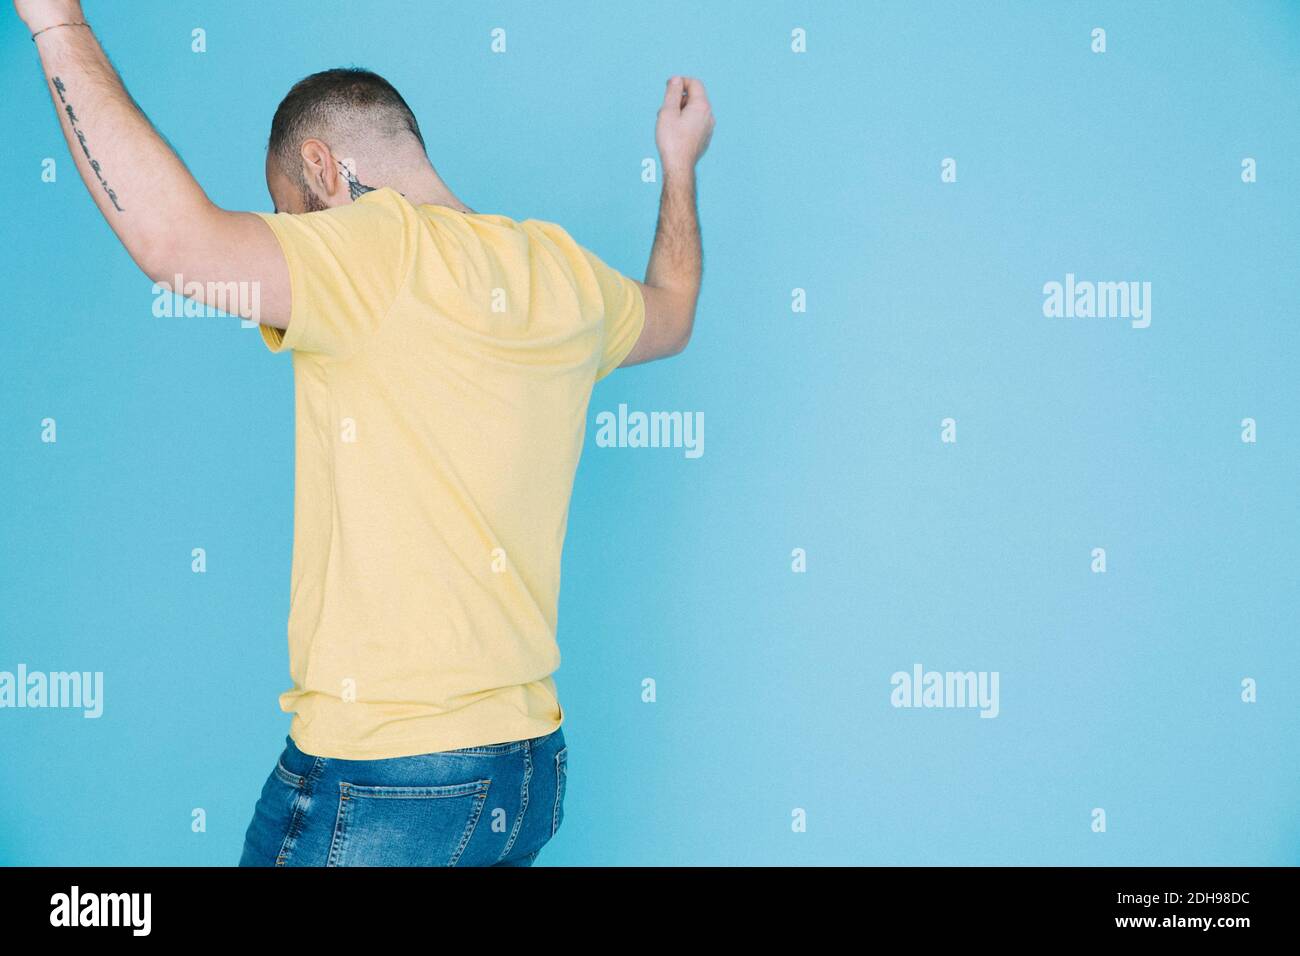 Rear view of man dancing against blue background Stock Photo